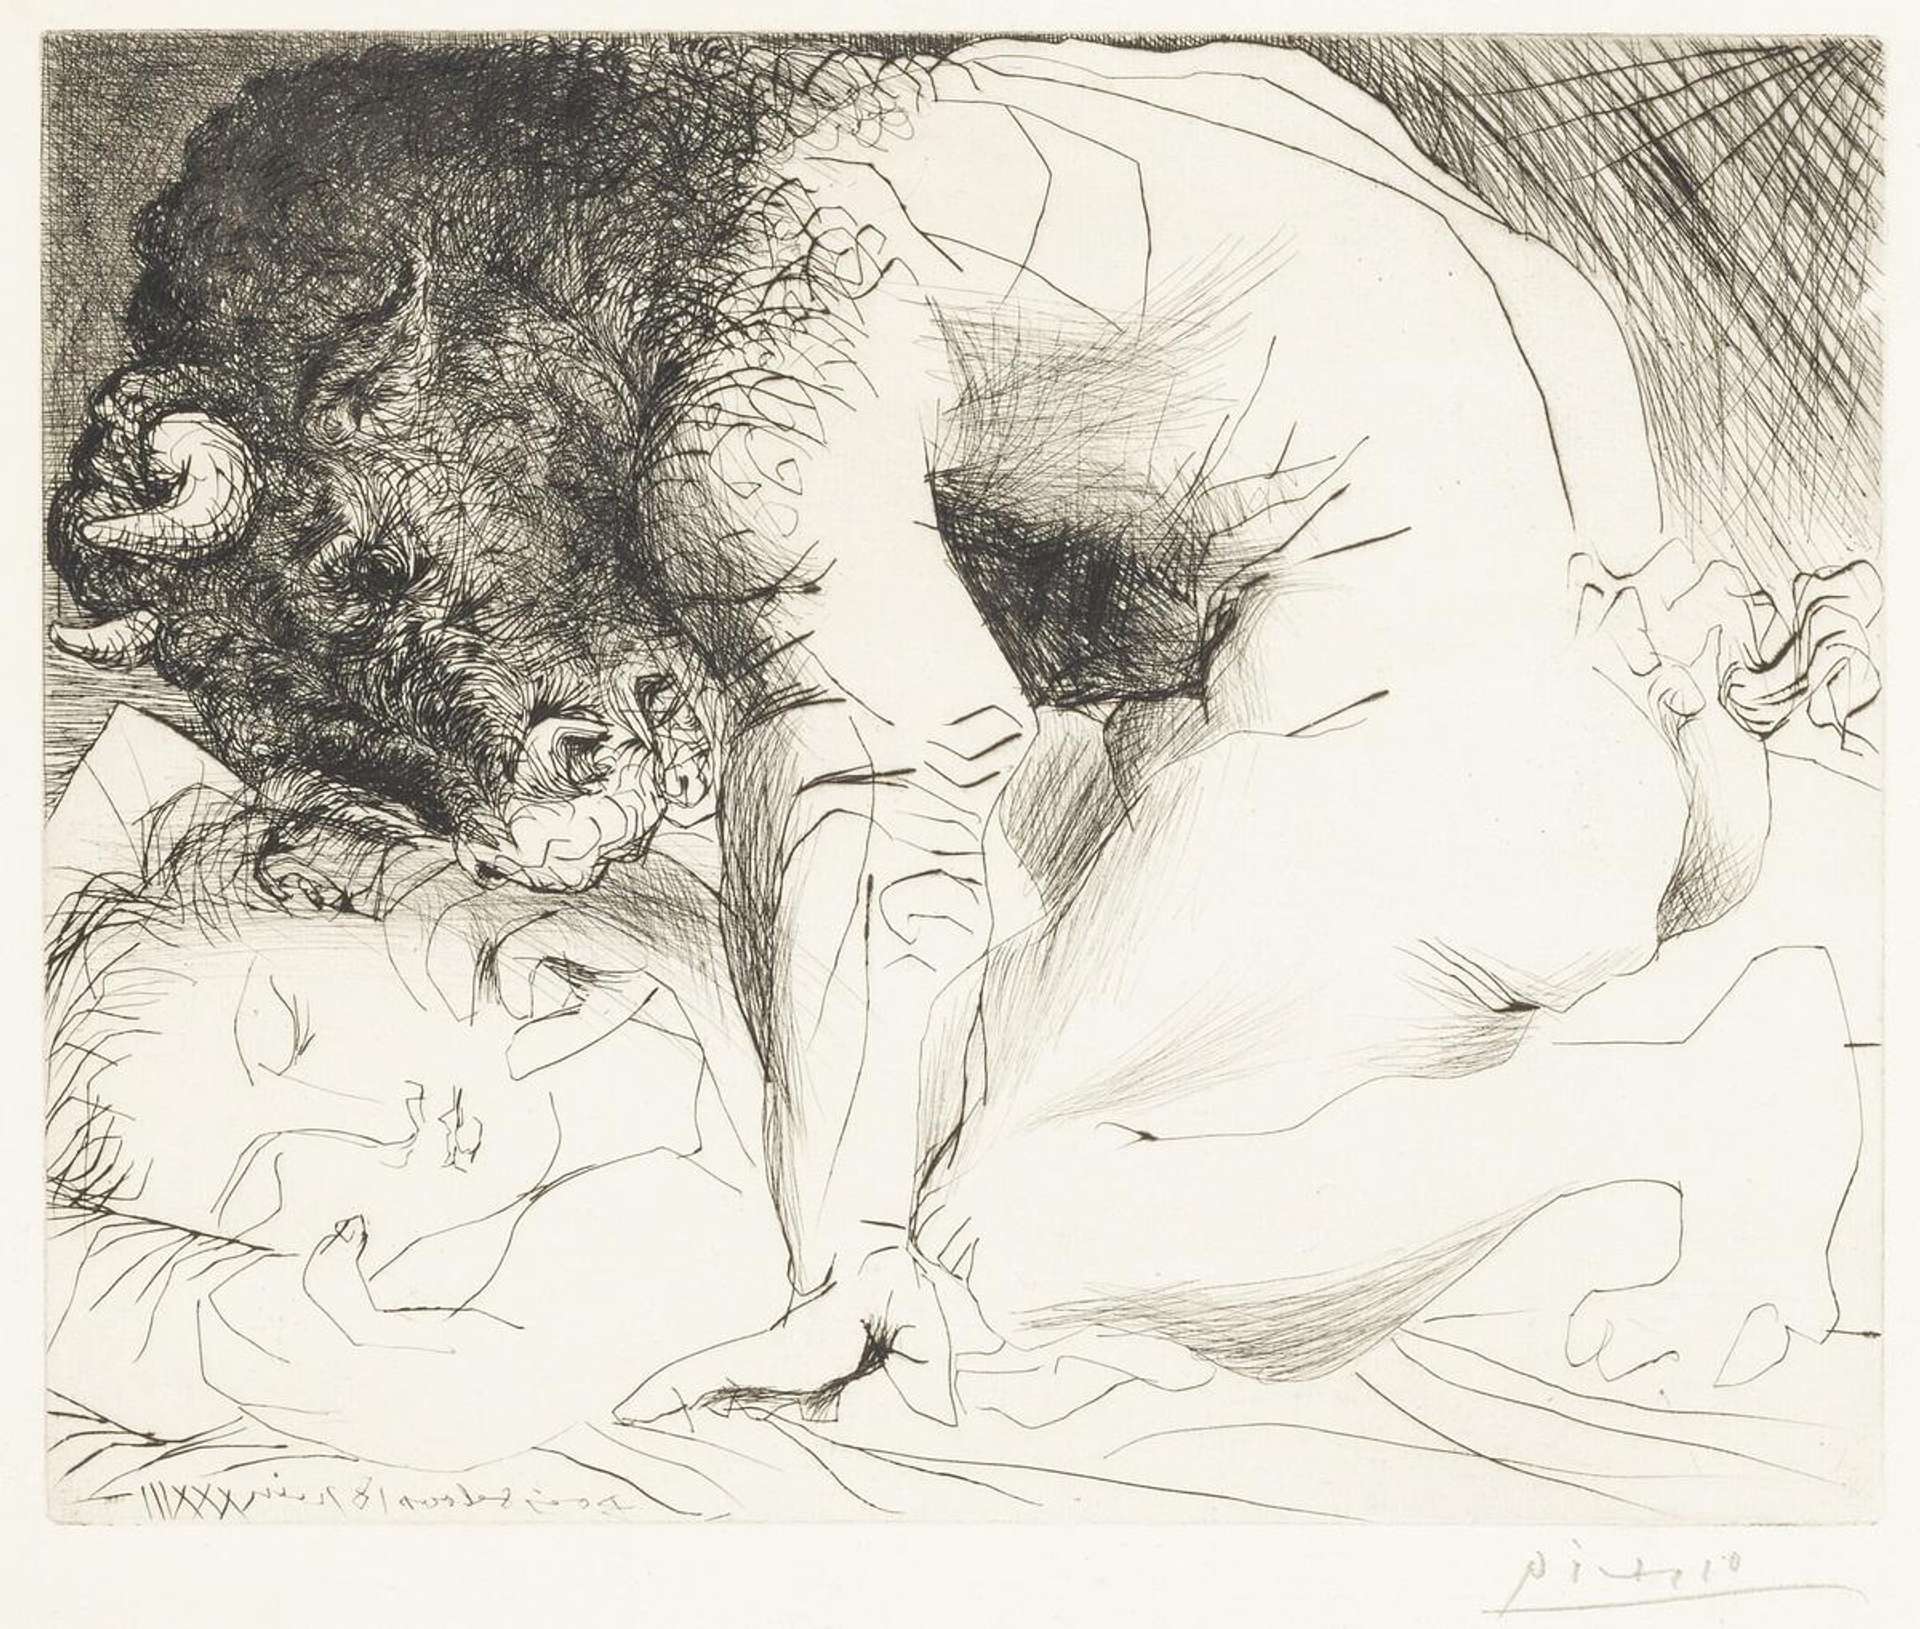 This monochrome print by Pablo Picasso shows a naked Minotaur looming over a sleeping woman.